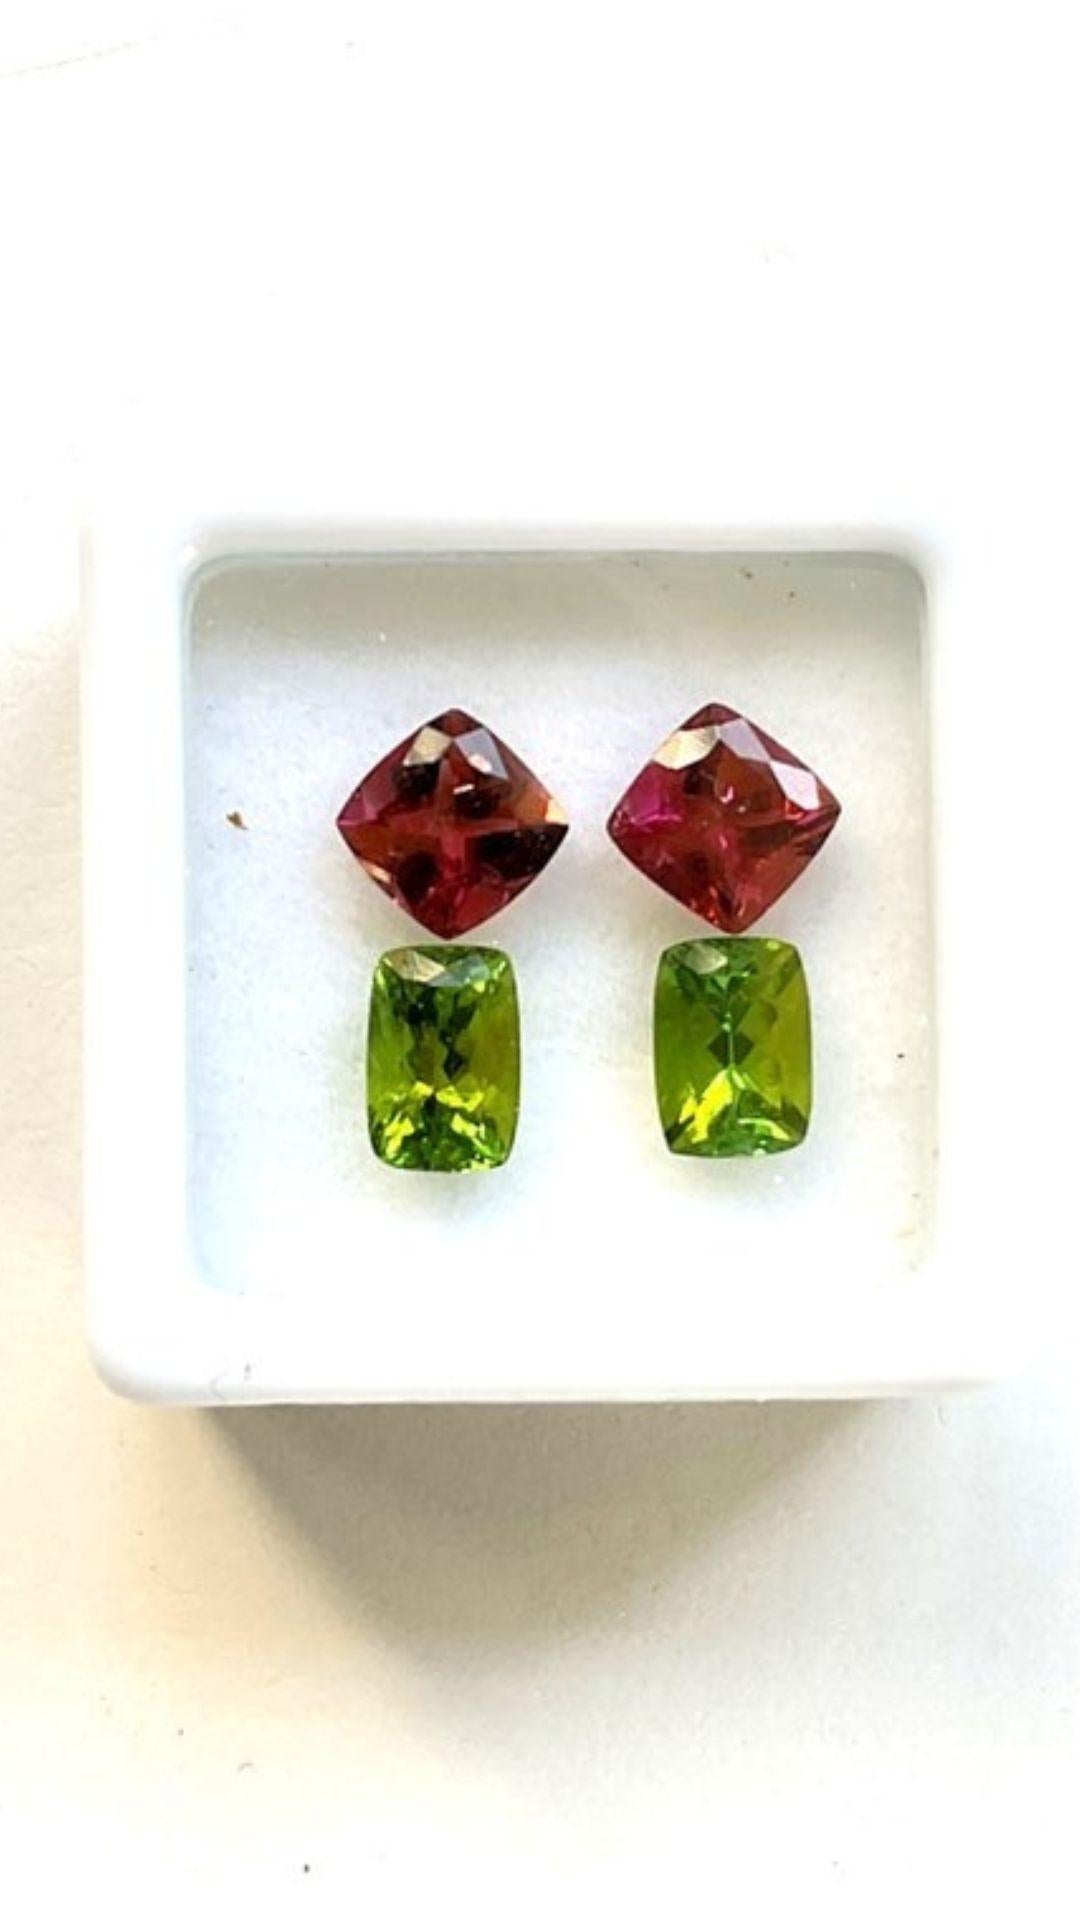 4.30 carats multi tourmaline , top quality tourmaline jewelry cut , natural tourmaline gemstone 4 pieces for jewelry

Gemstone - Tourmaline
Weight- 4.30 Carats
Shape - Octagon , Cushion
Size - 6x6 to 7x5 MM
Pieces - 4
Drill- Not Drilled


Prismatic